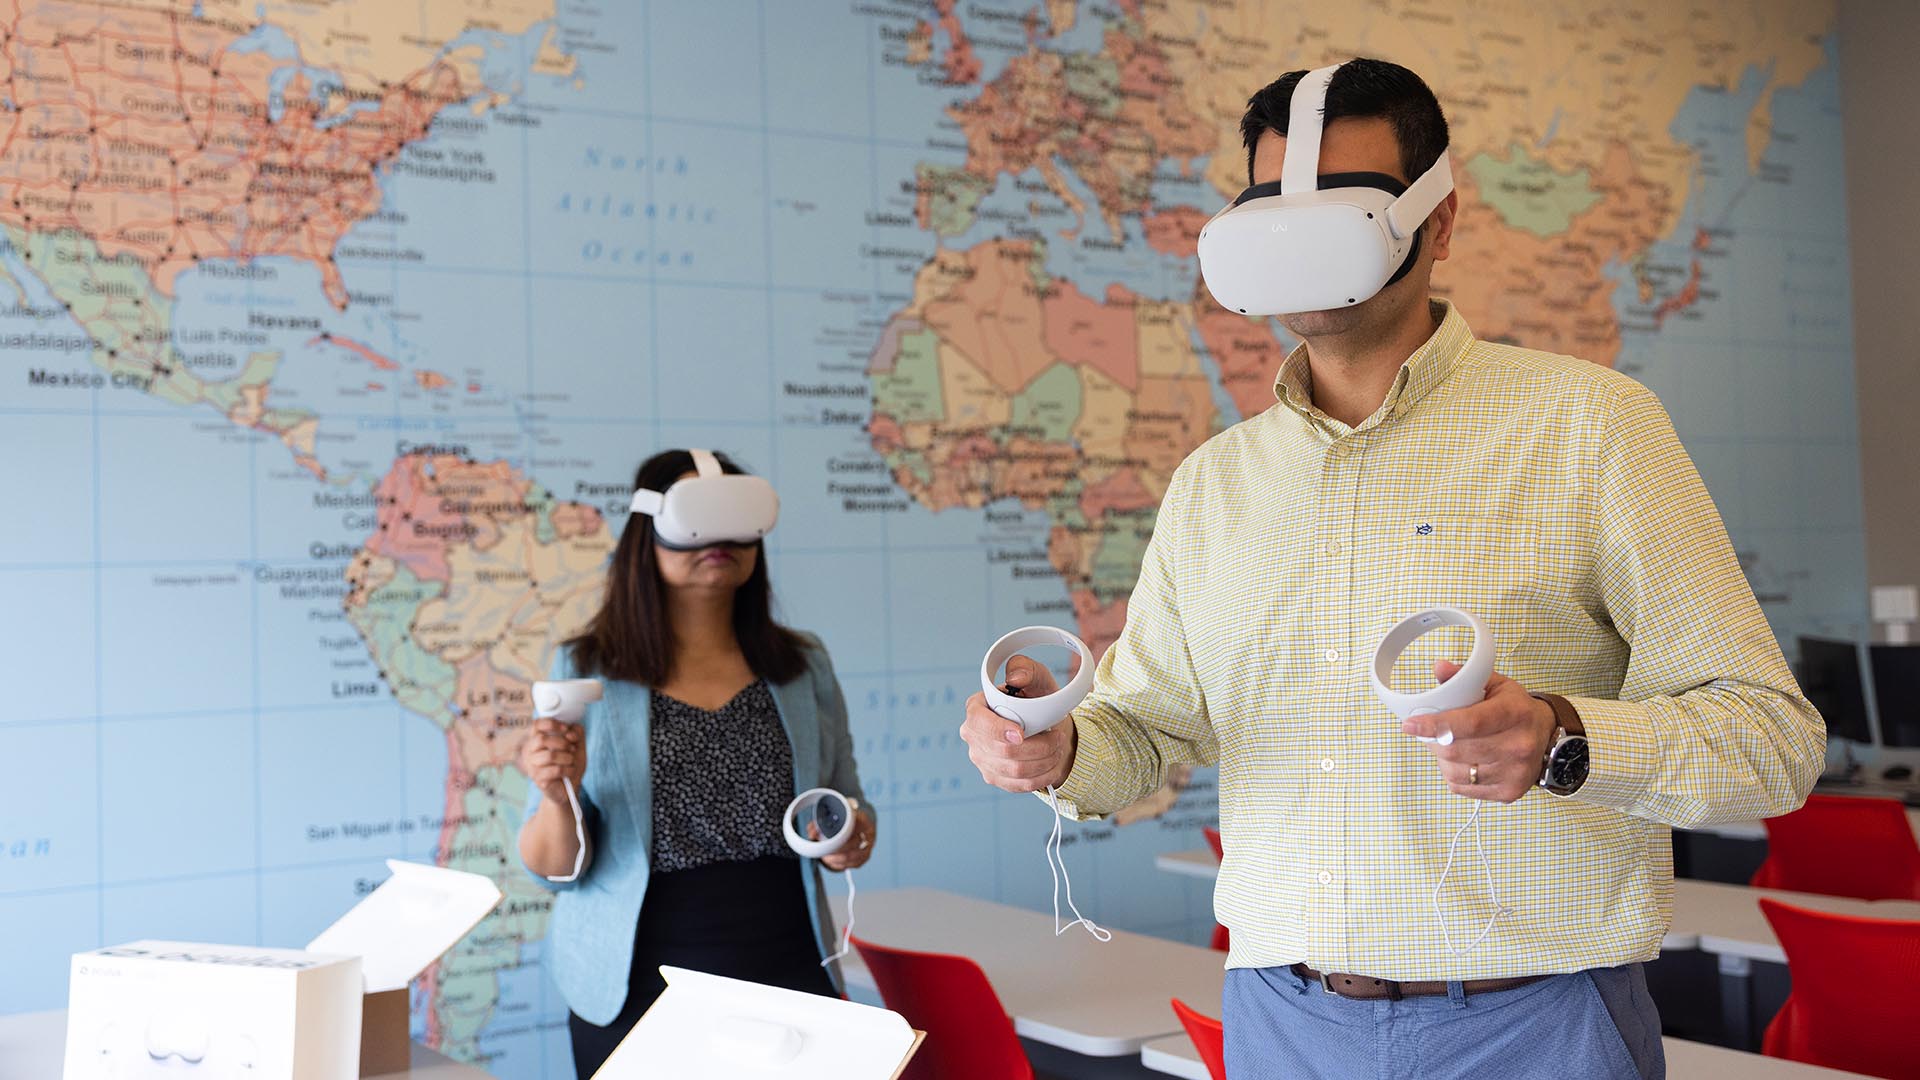 School of Hospitality professors Smita Singh, left, and Kiyan Shafieizadeh try out the Oculus virtual reality goggles